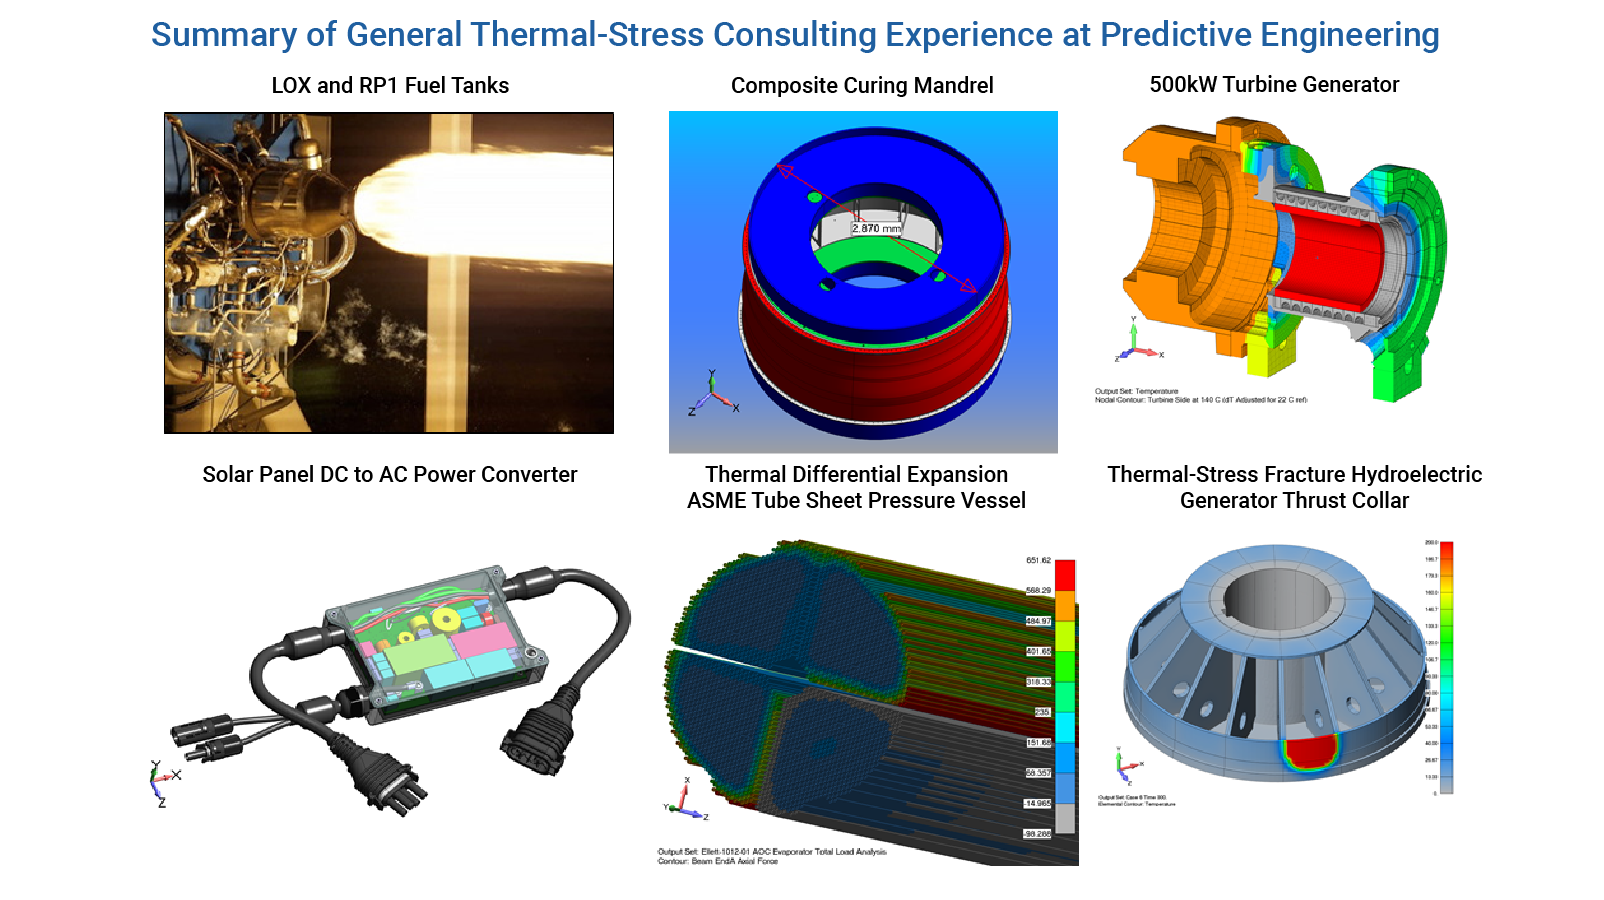 Summary of General Thermal-Stress FEA Consulting Projects at Predictive Engineering, Portland, Oregon, USA